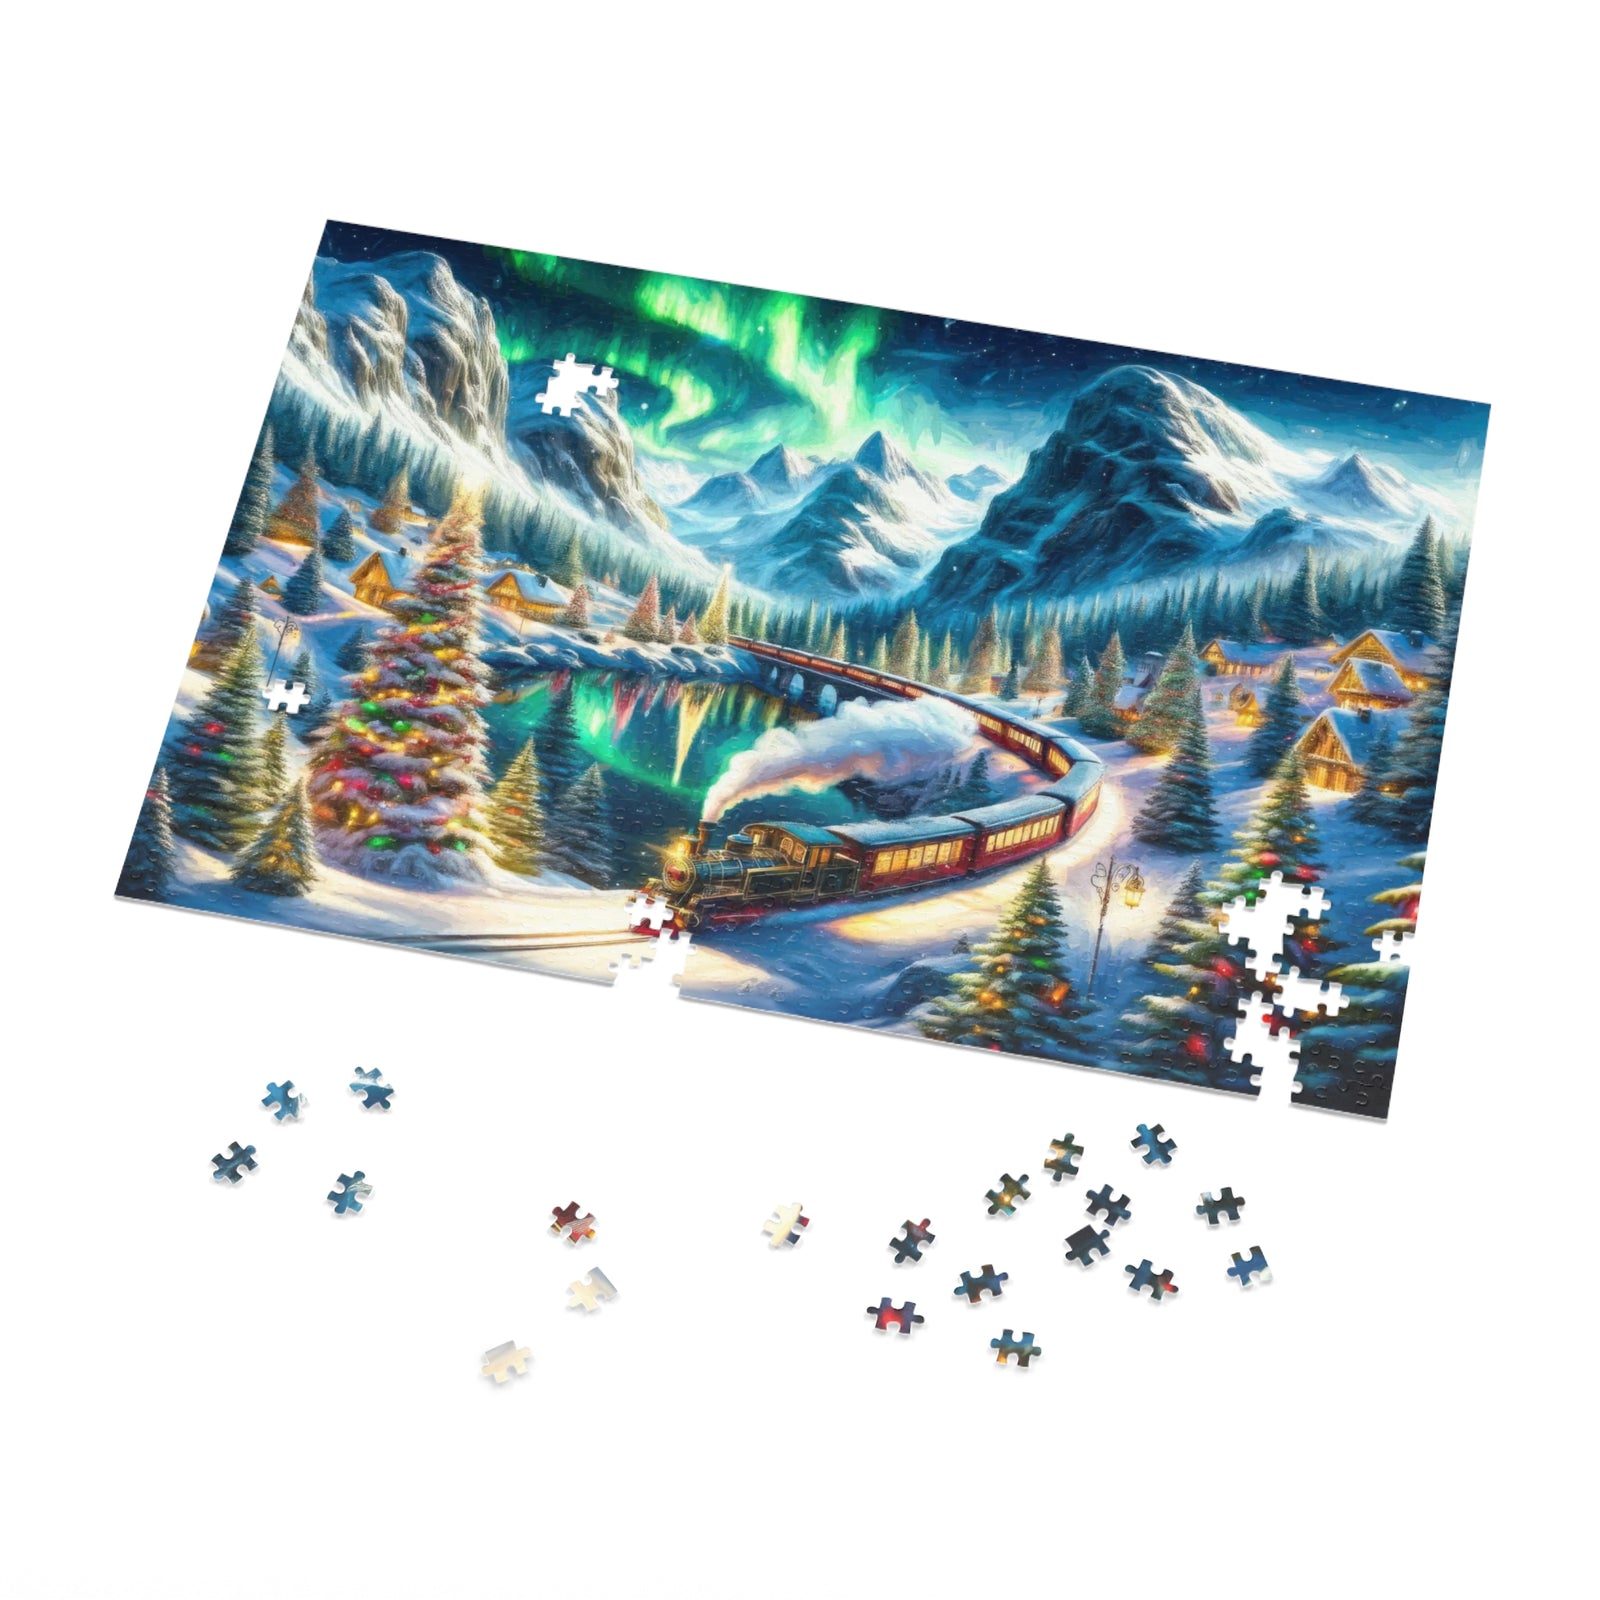 Yuletide Express - Puzzle pictural